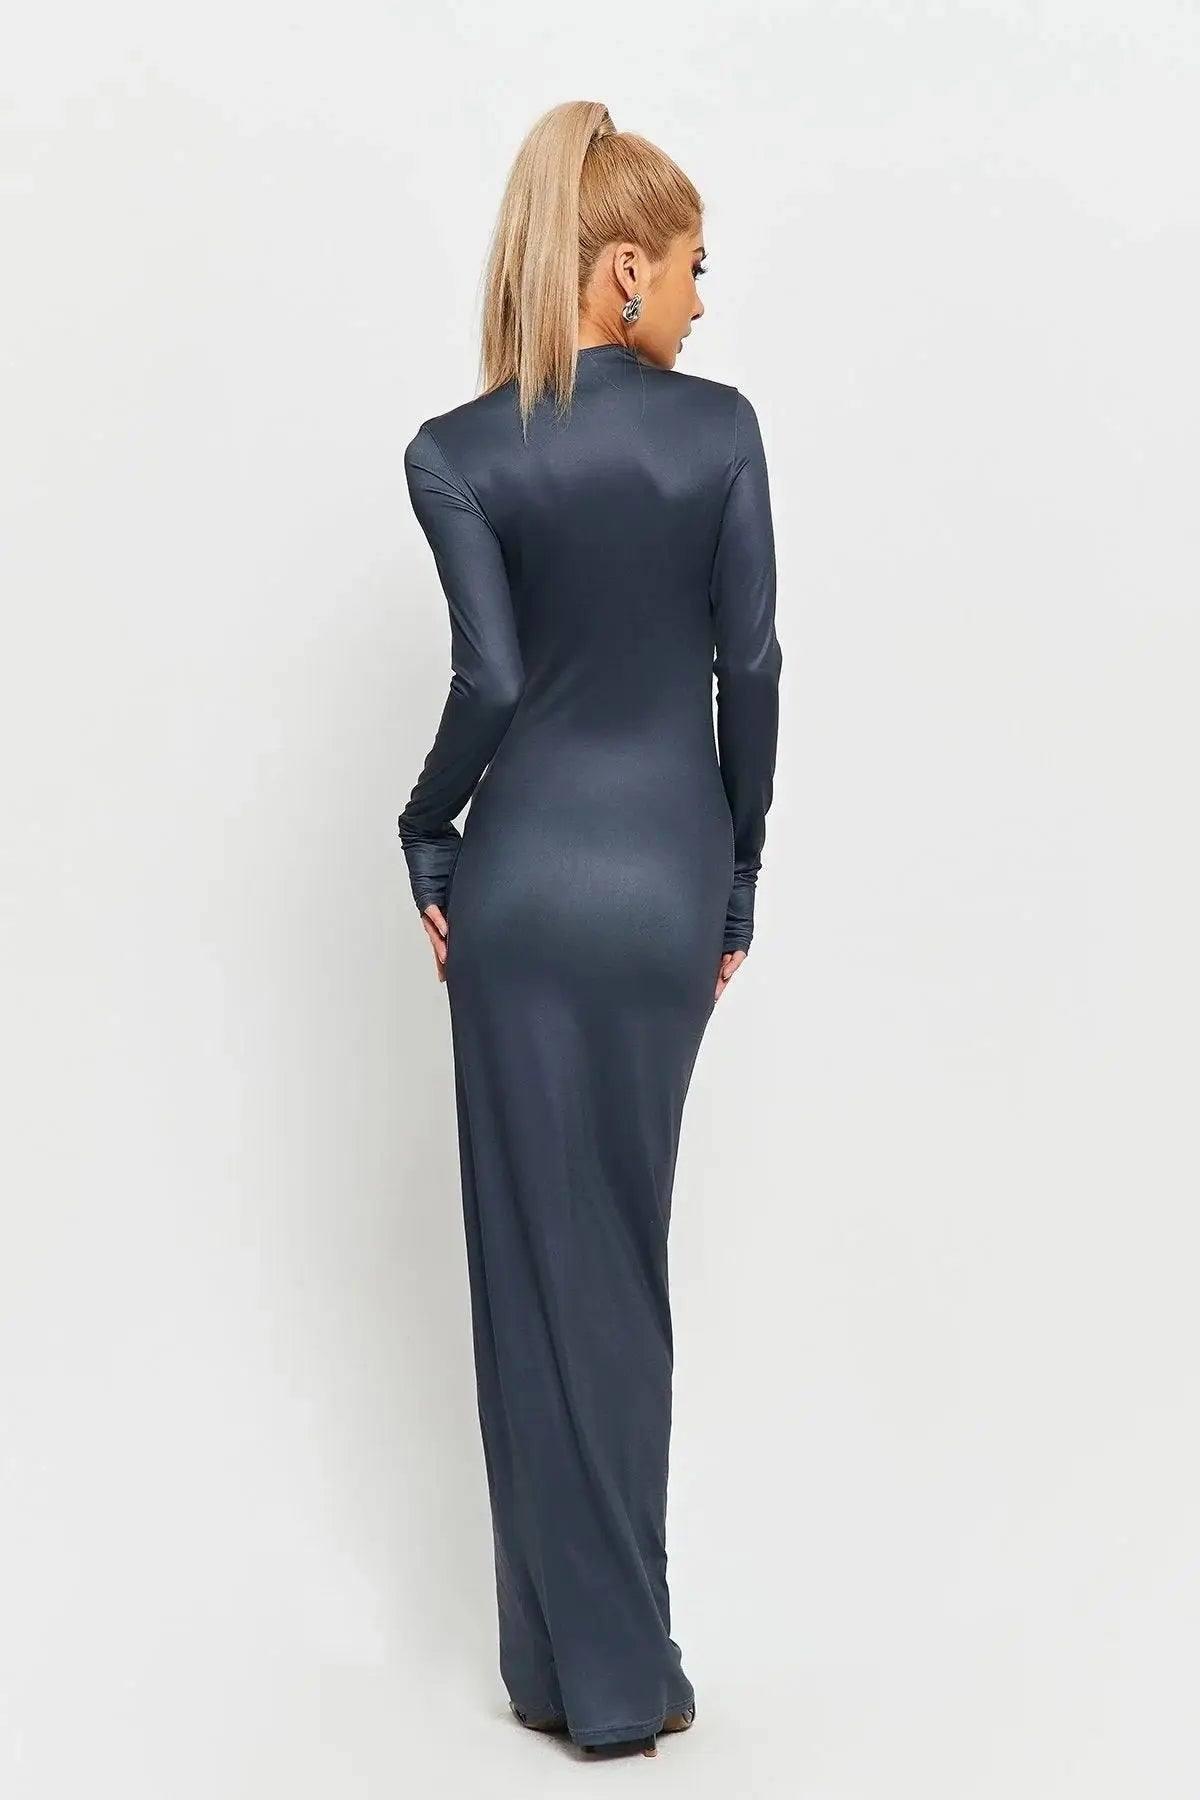 3D Body Printing Super Long Sleeve Body Robe Party Dress-2